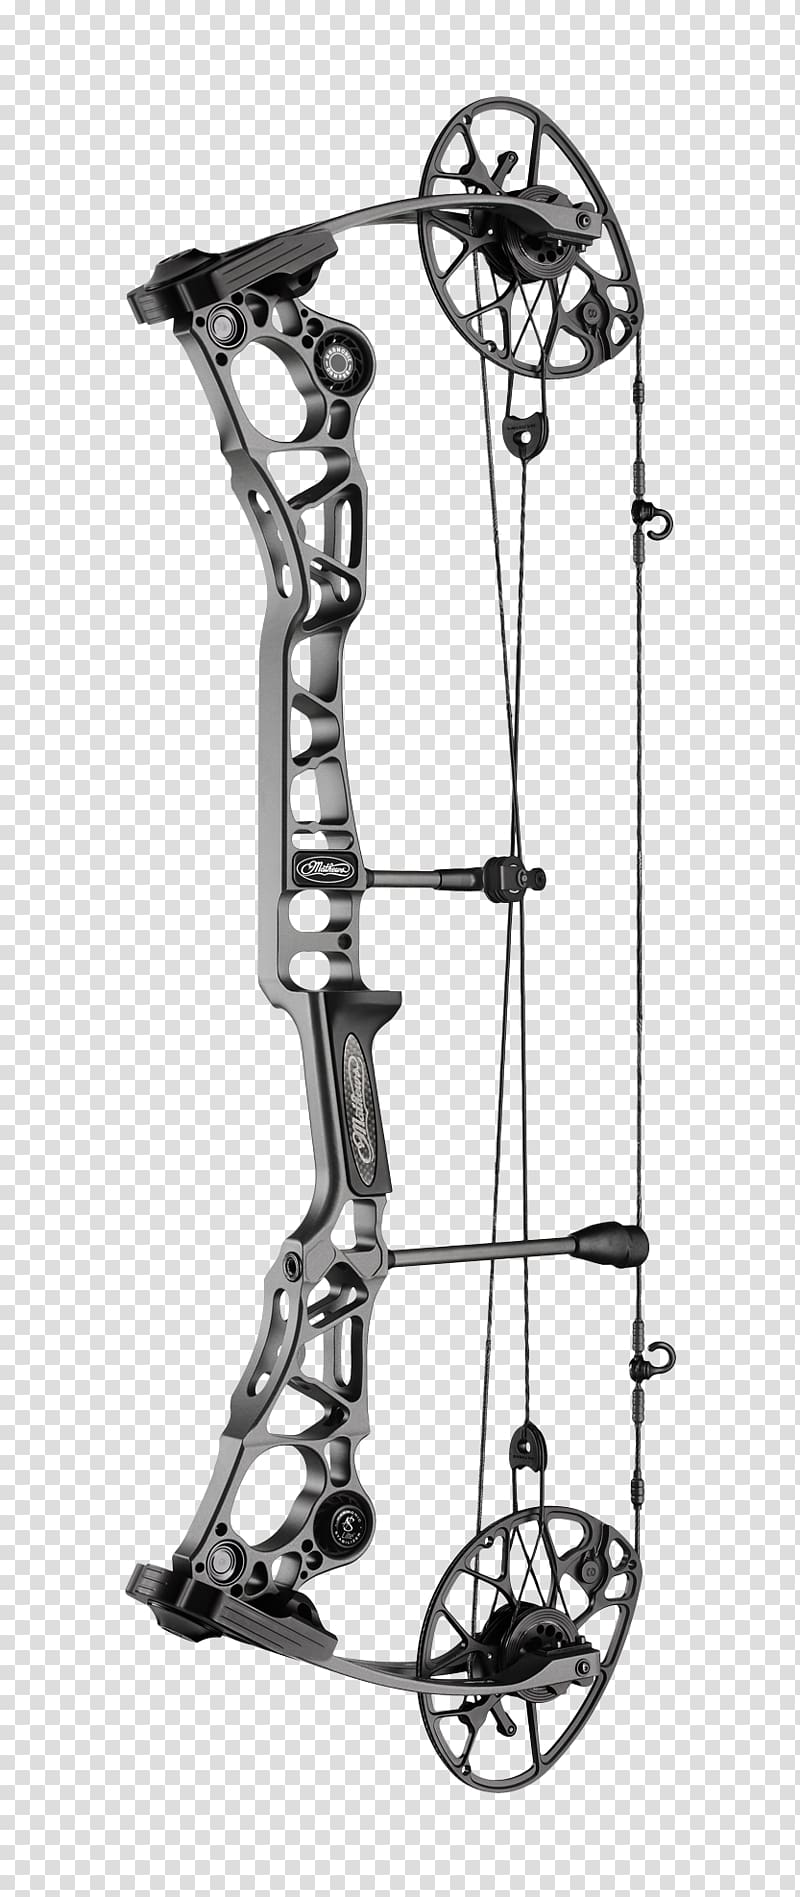 Compound Bows Bow and arrow Archery Bowhunting, archery puppies transparent background PNG clipart